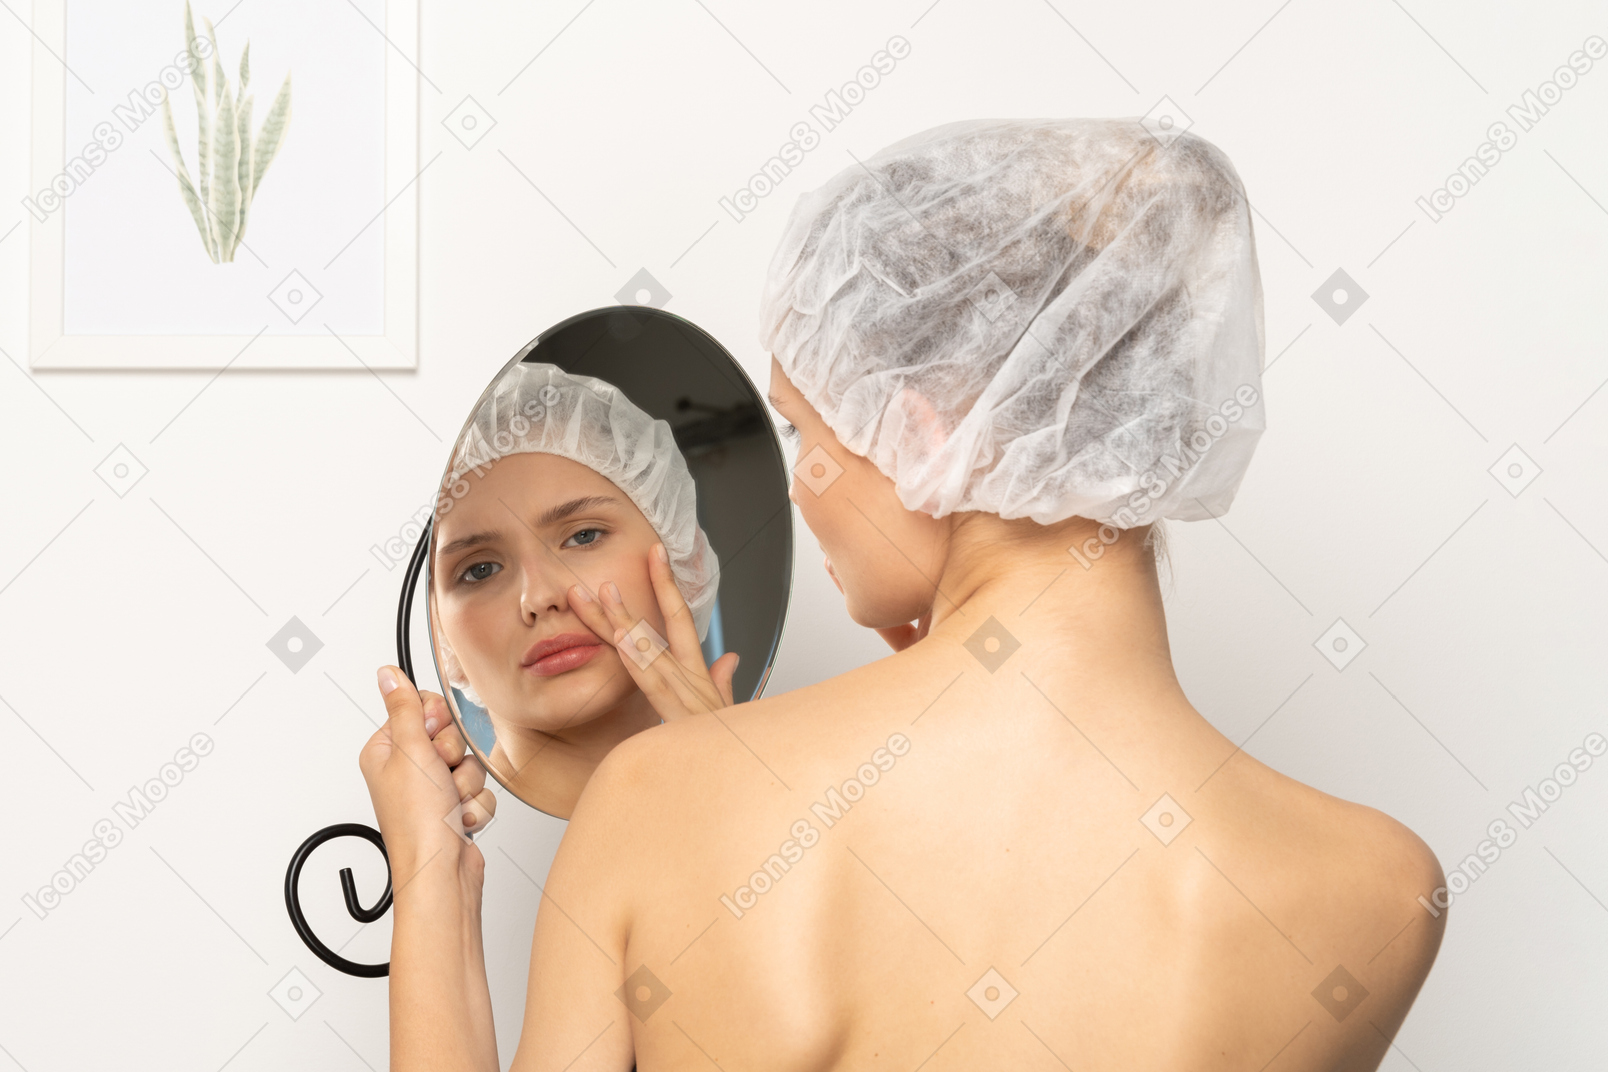 Young woman in surgical cap looking at herself in the mirror